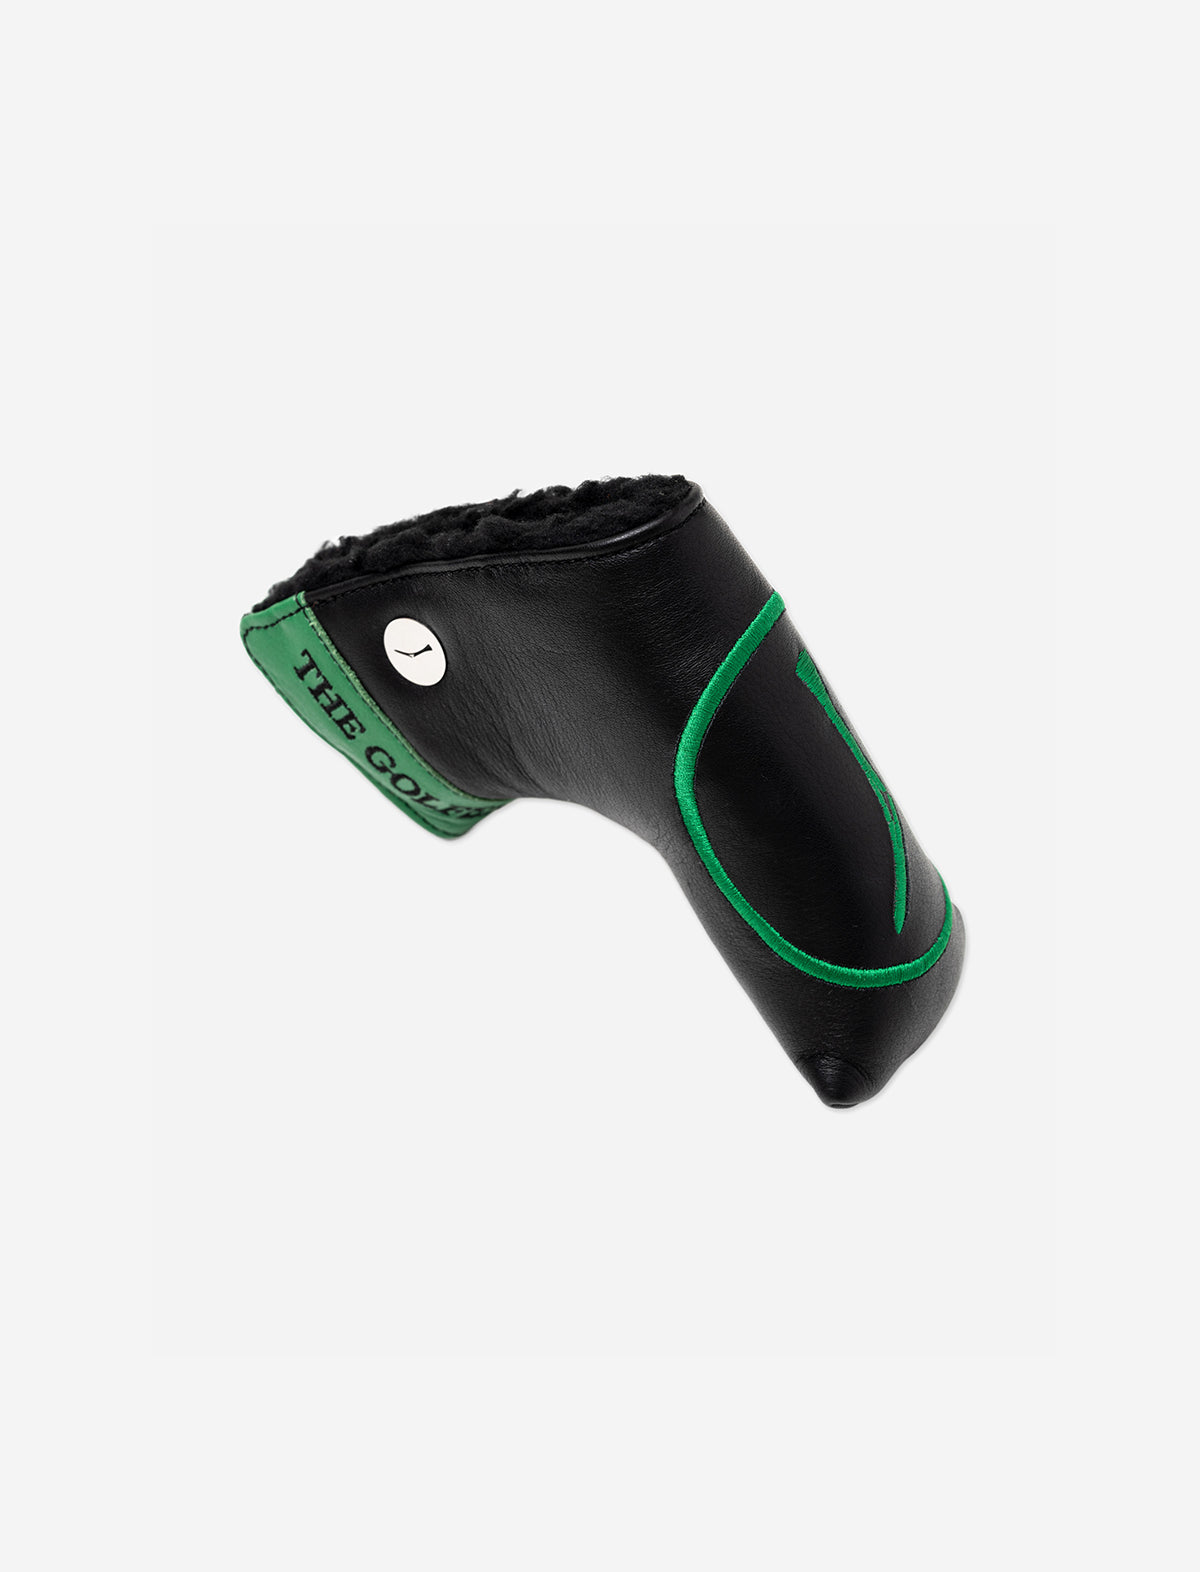 THE GOLFERS JOURNAL The Blade Putter Cover in Green